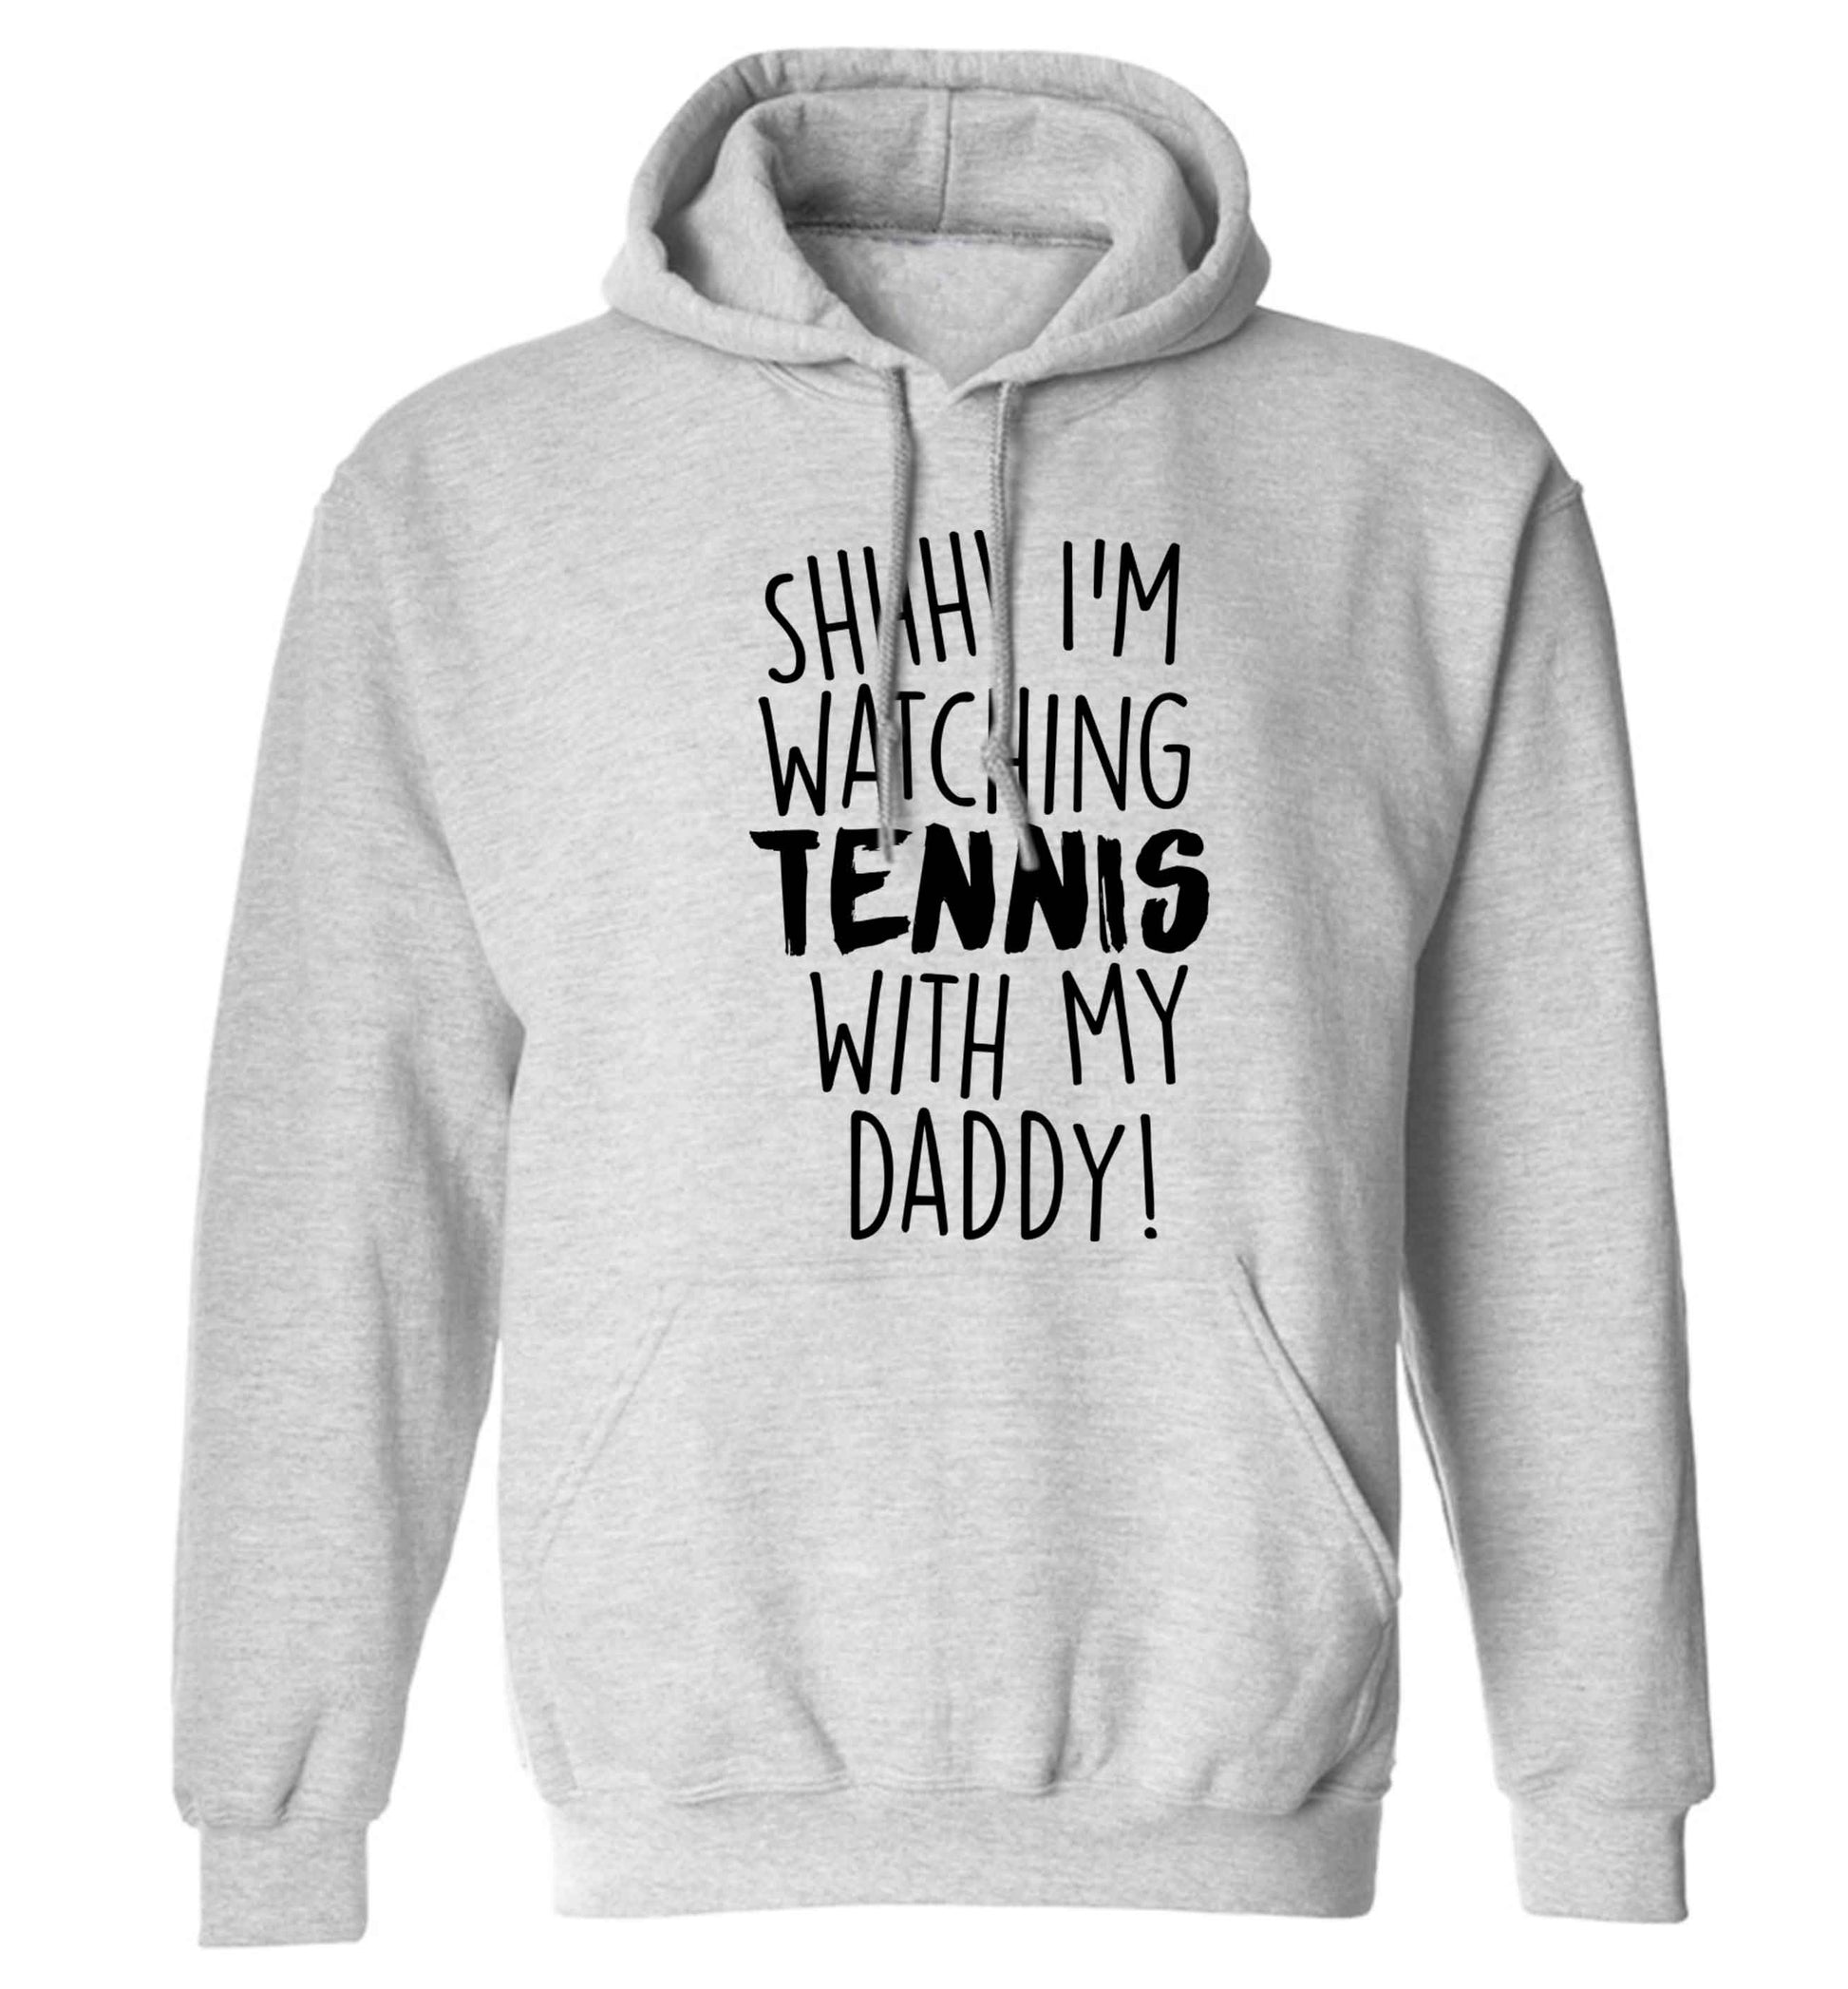 Shh! I'm watching tennis with my daddy! adults unisex grey hoodie 2XL